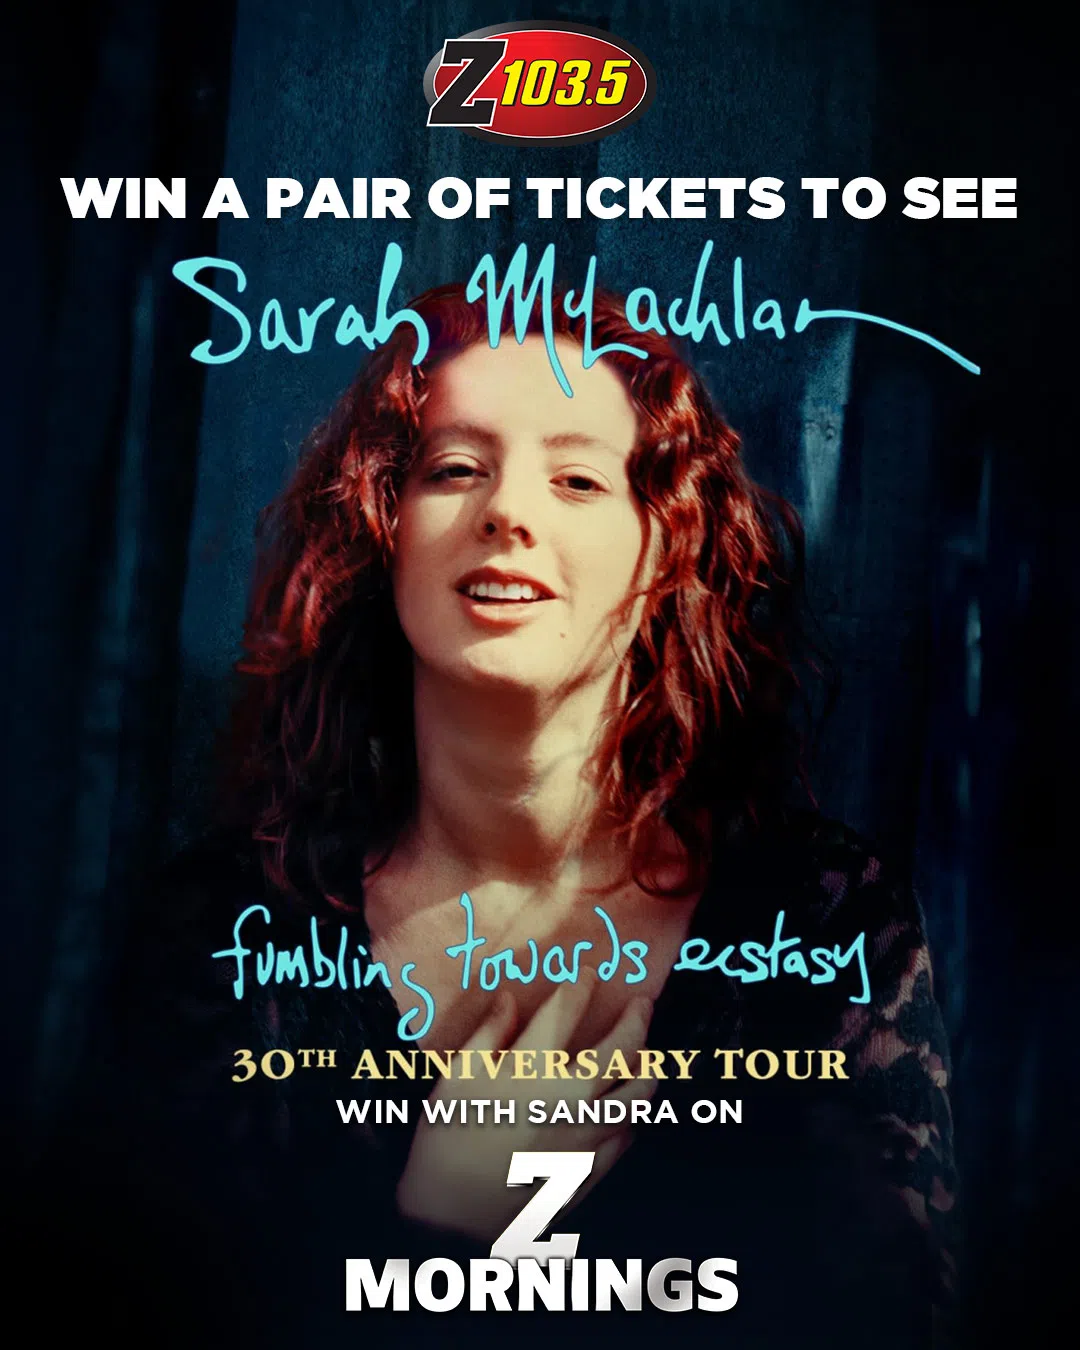 Feature: https://z1035.com/win/win-tickets-to-see-sarah-mclachlan/